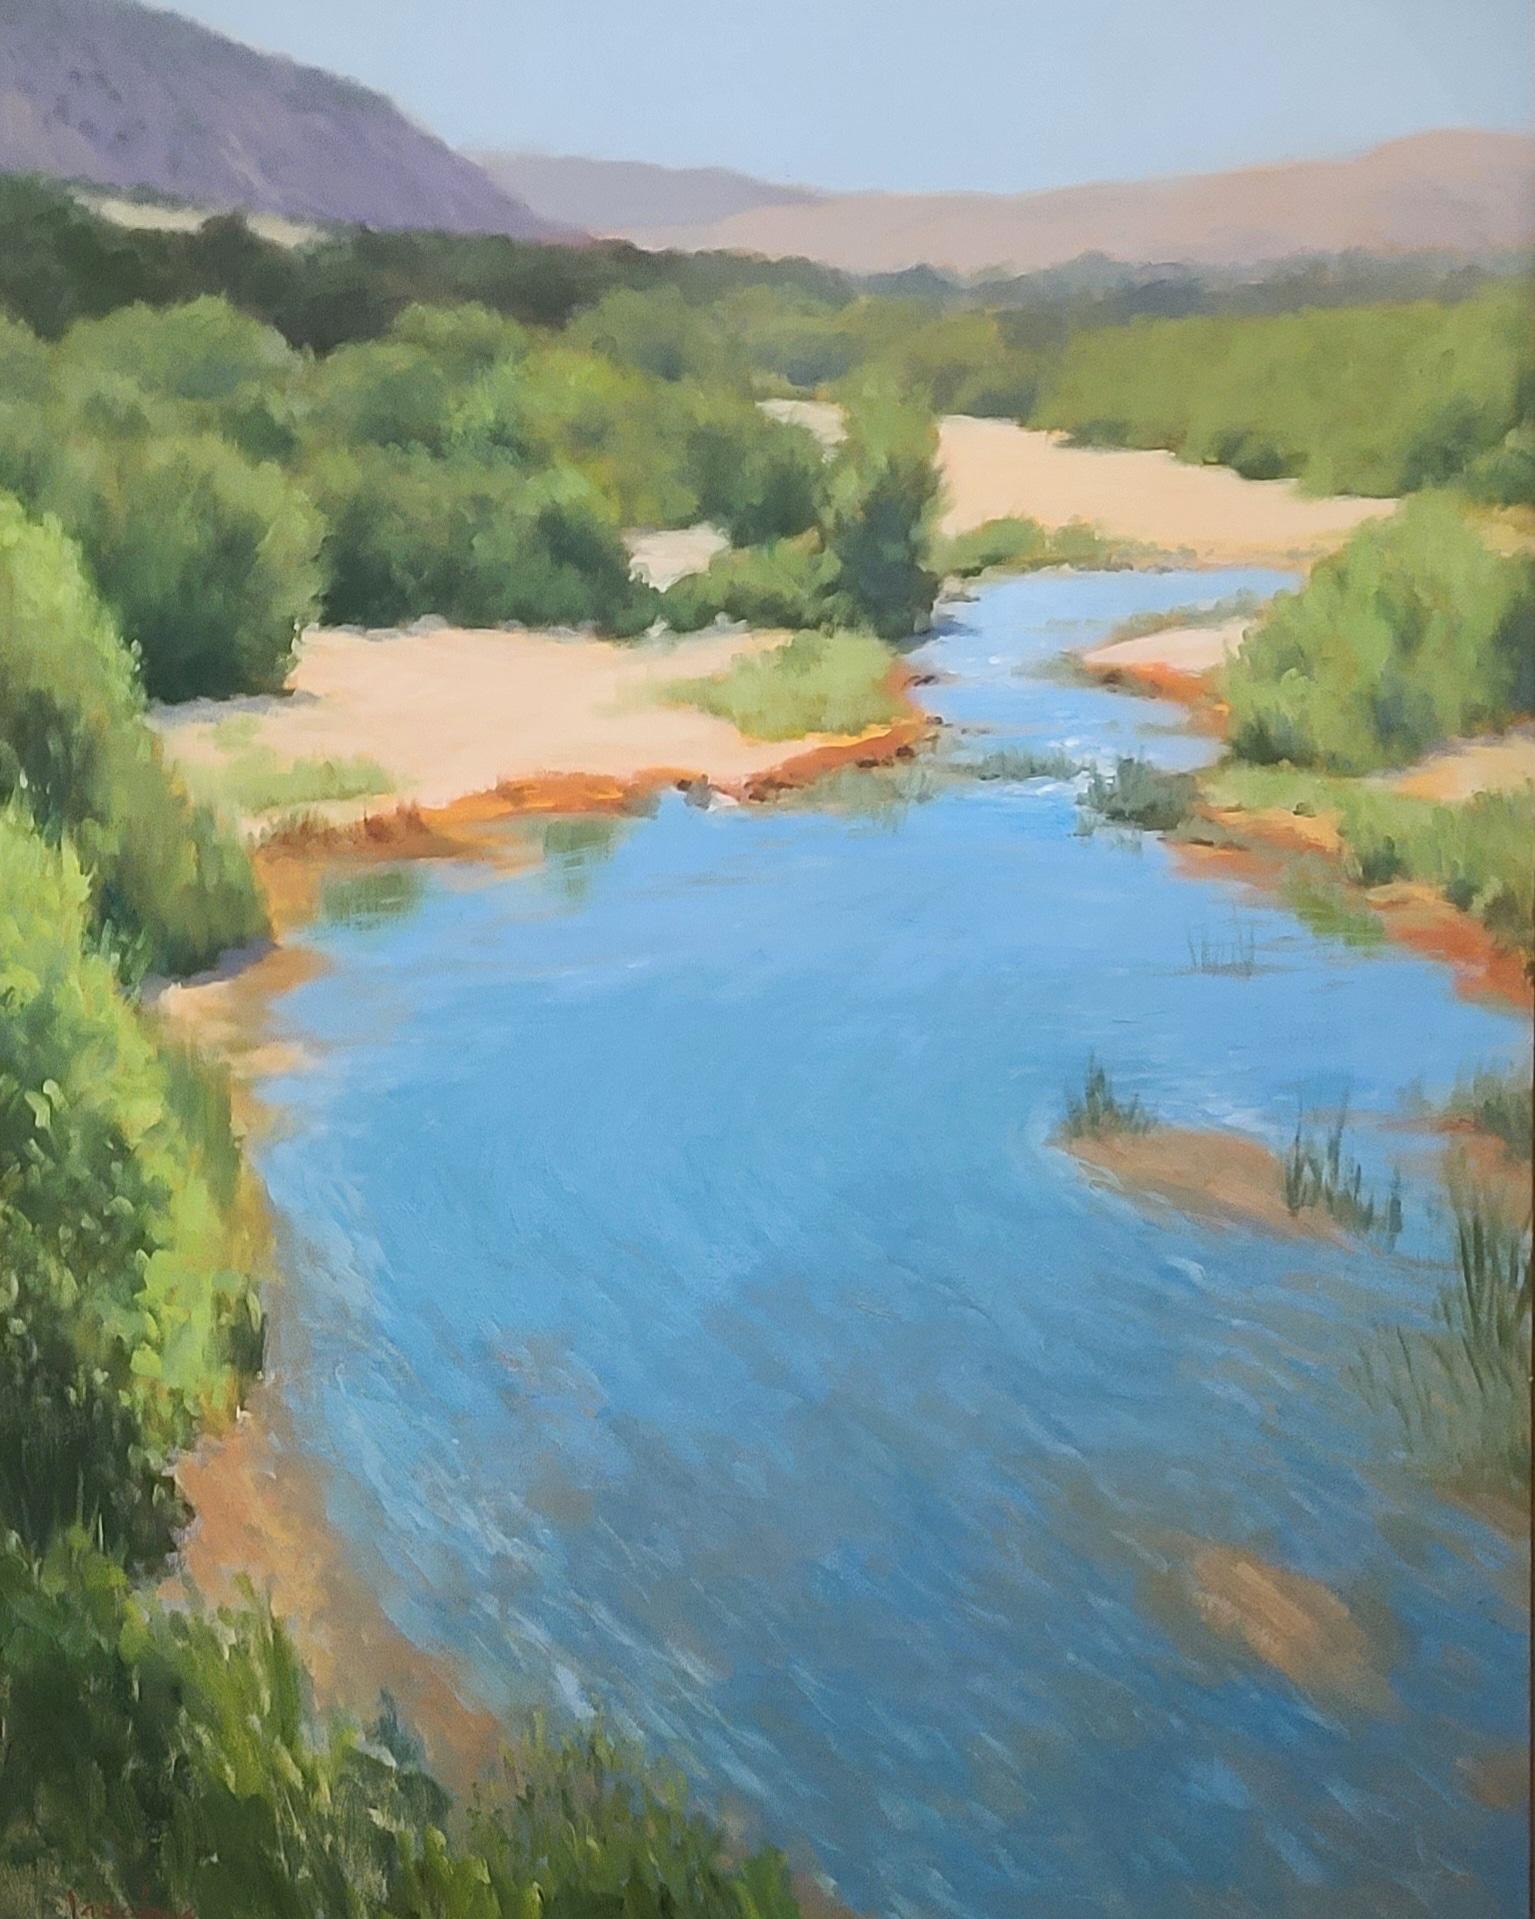 "Santa Ynez River Reflections" is an atmospheric oil painted from a study done on location in California by noted California artist Jacobus Baas. This plein air style painting exhibits the subtle touch and beautiful light that the artist is known